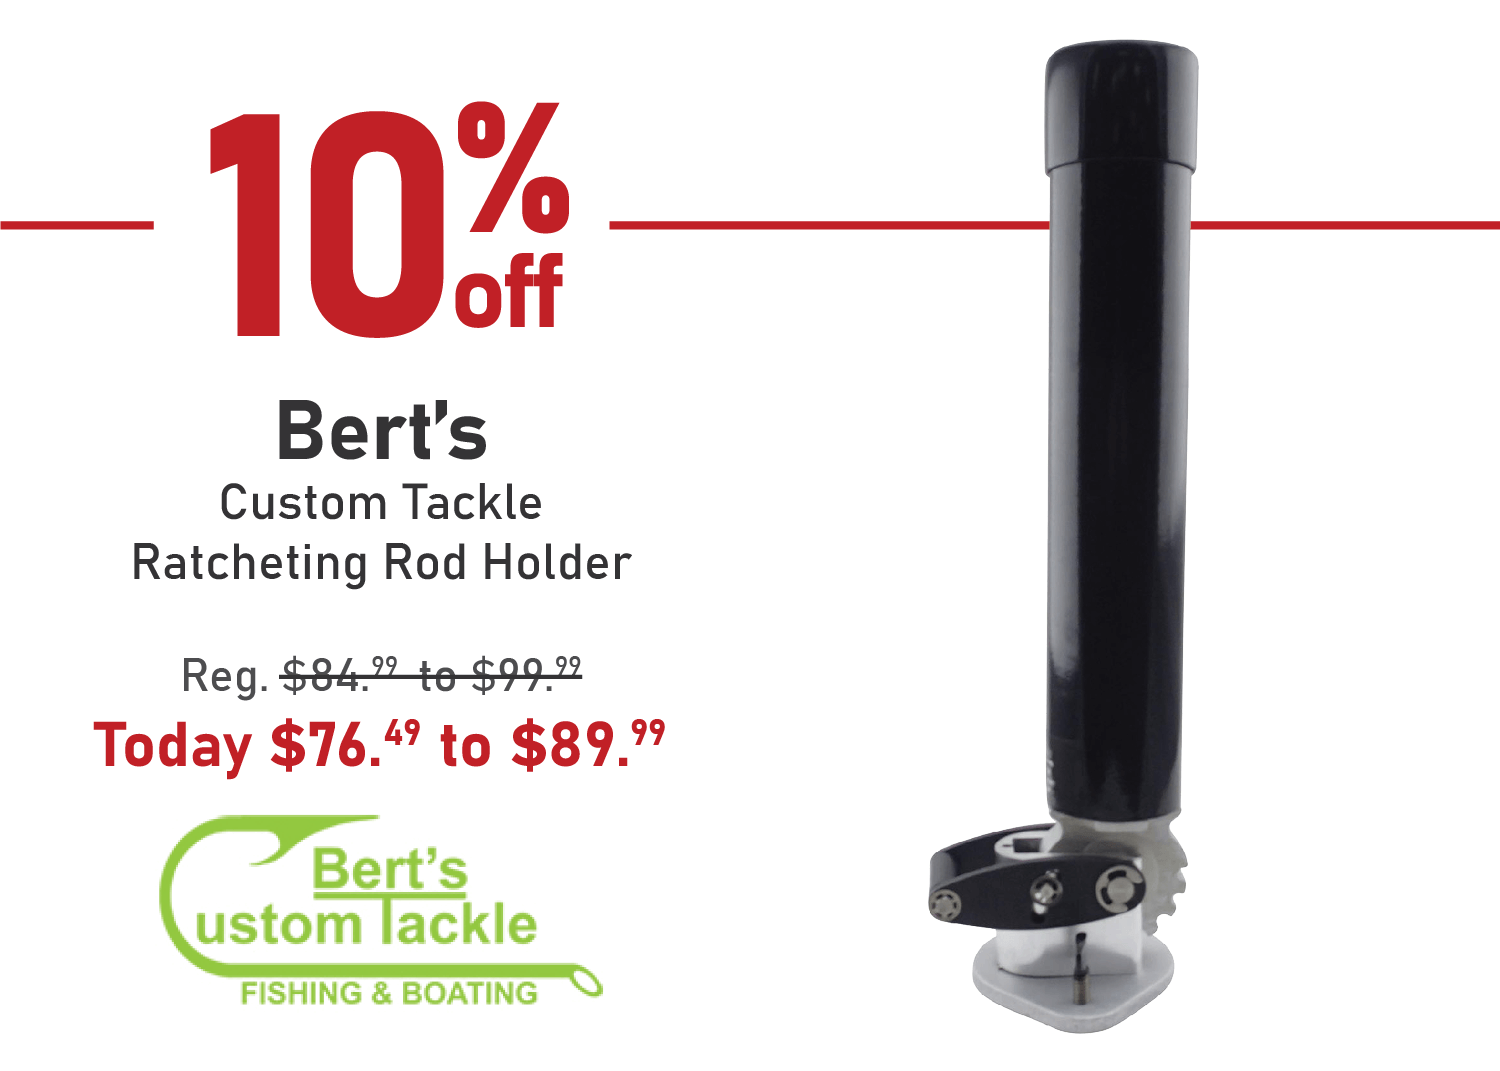 Save 10% on the Bert's Custom Tackle Ratcheting Rod Holder